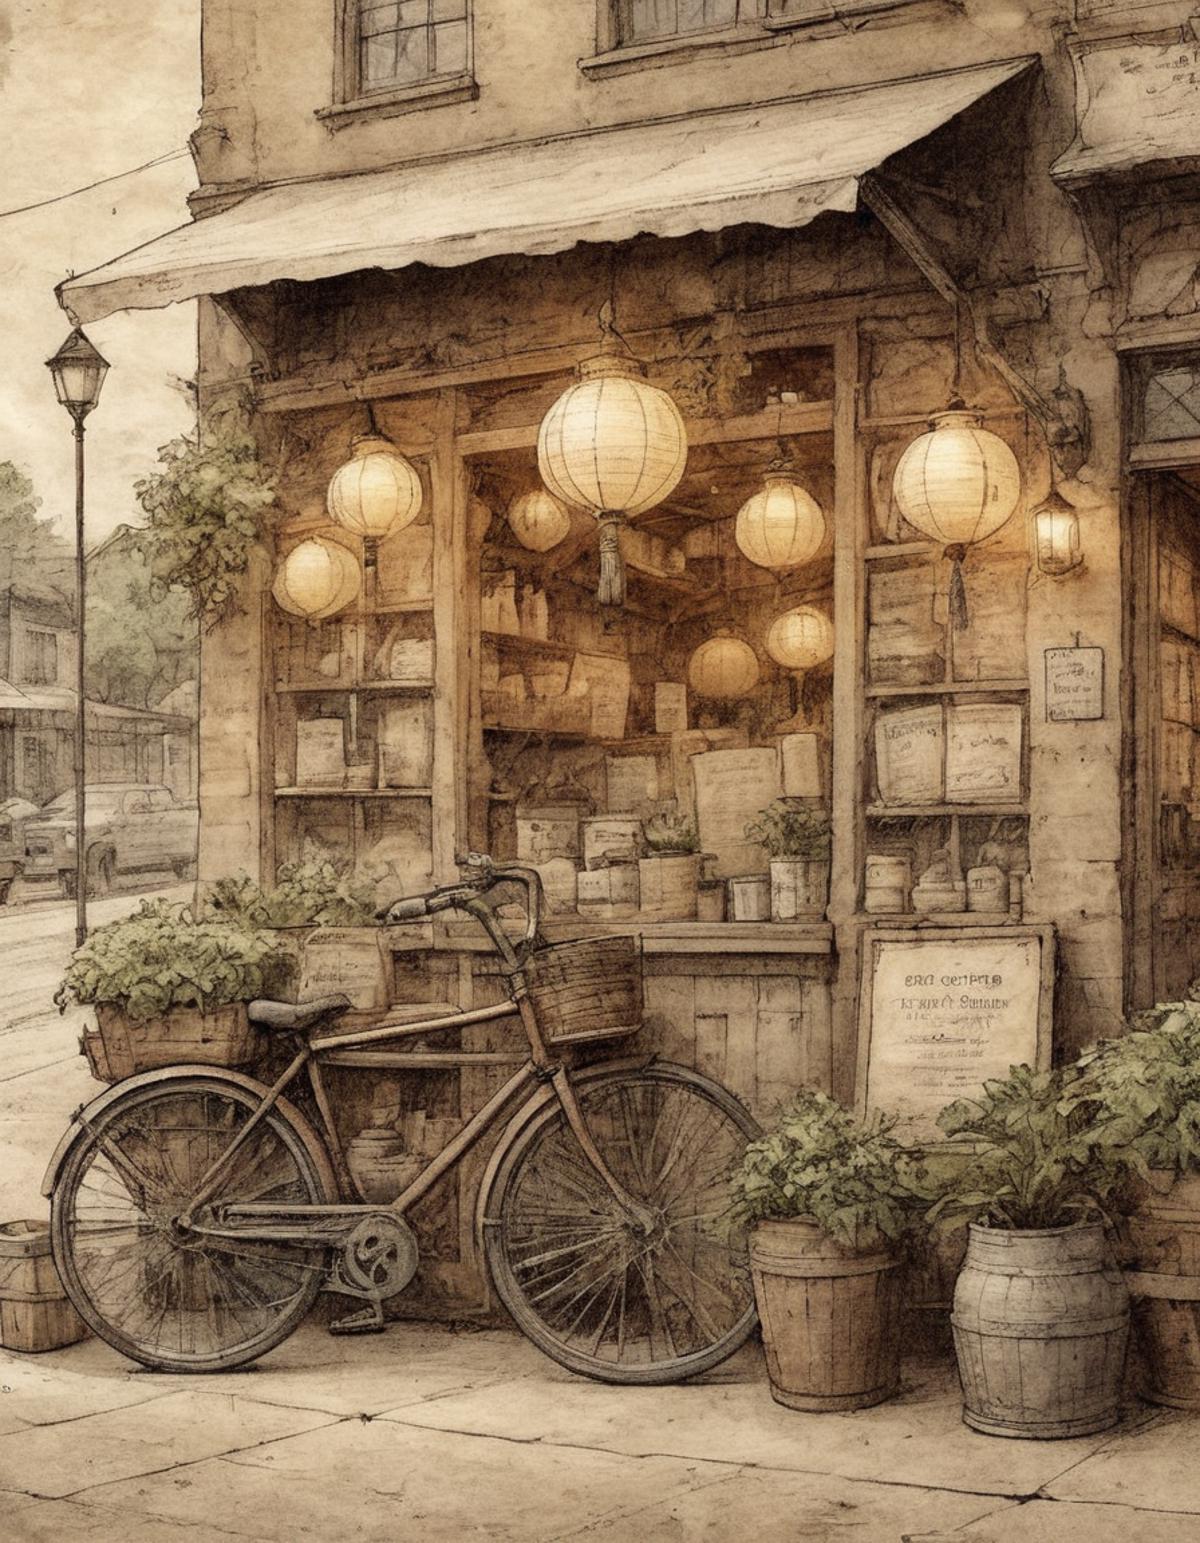 A bicycle parked in front of a store with hanging lanterns and potted plants.